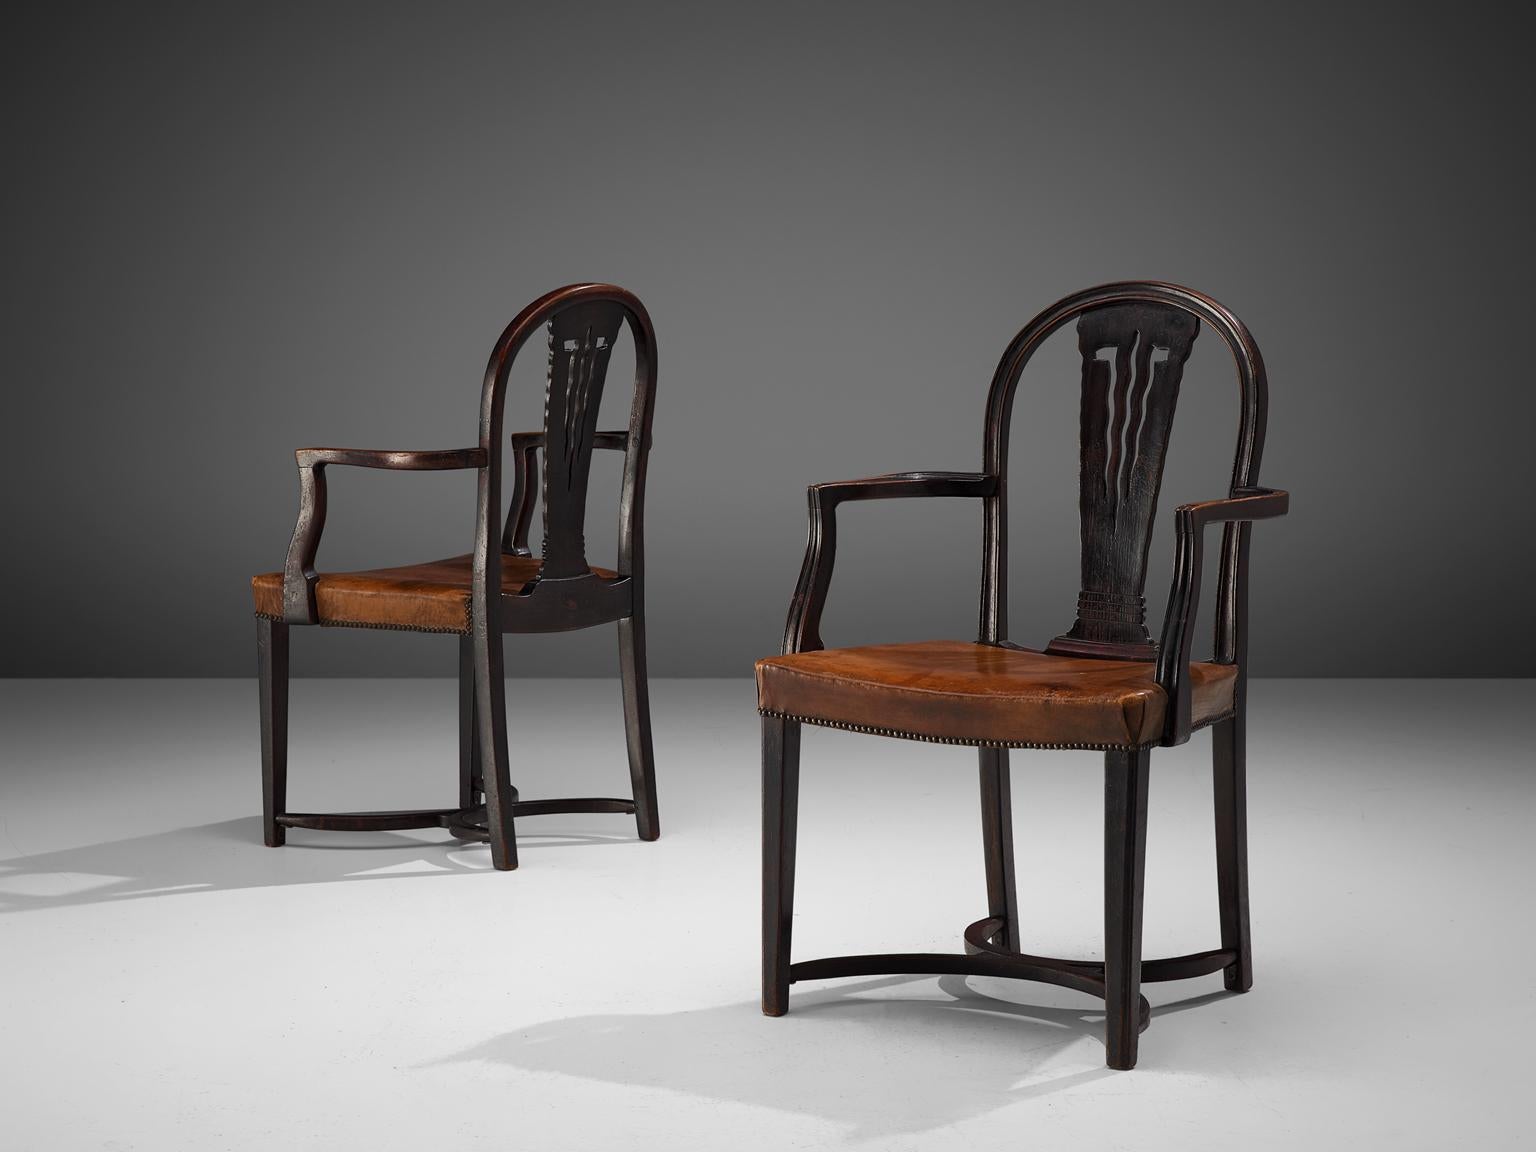 Thonet, pair of armchairs, bentwood and leather, Austria, 1920s

A stunning Jugendstil pair of armchairs by Thonet, produced in the 1920s. The chairs are feature the architect-designed Viennese bentwood furniture in the Secession style, a genre that